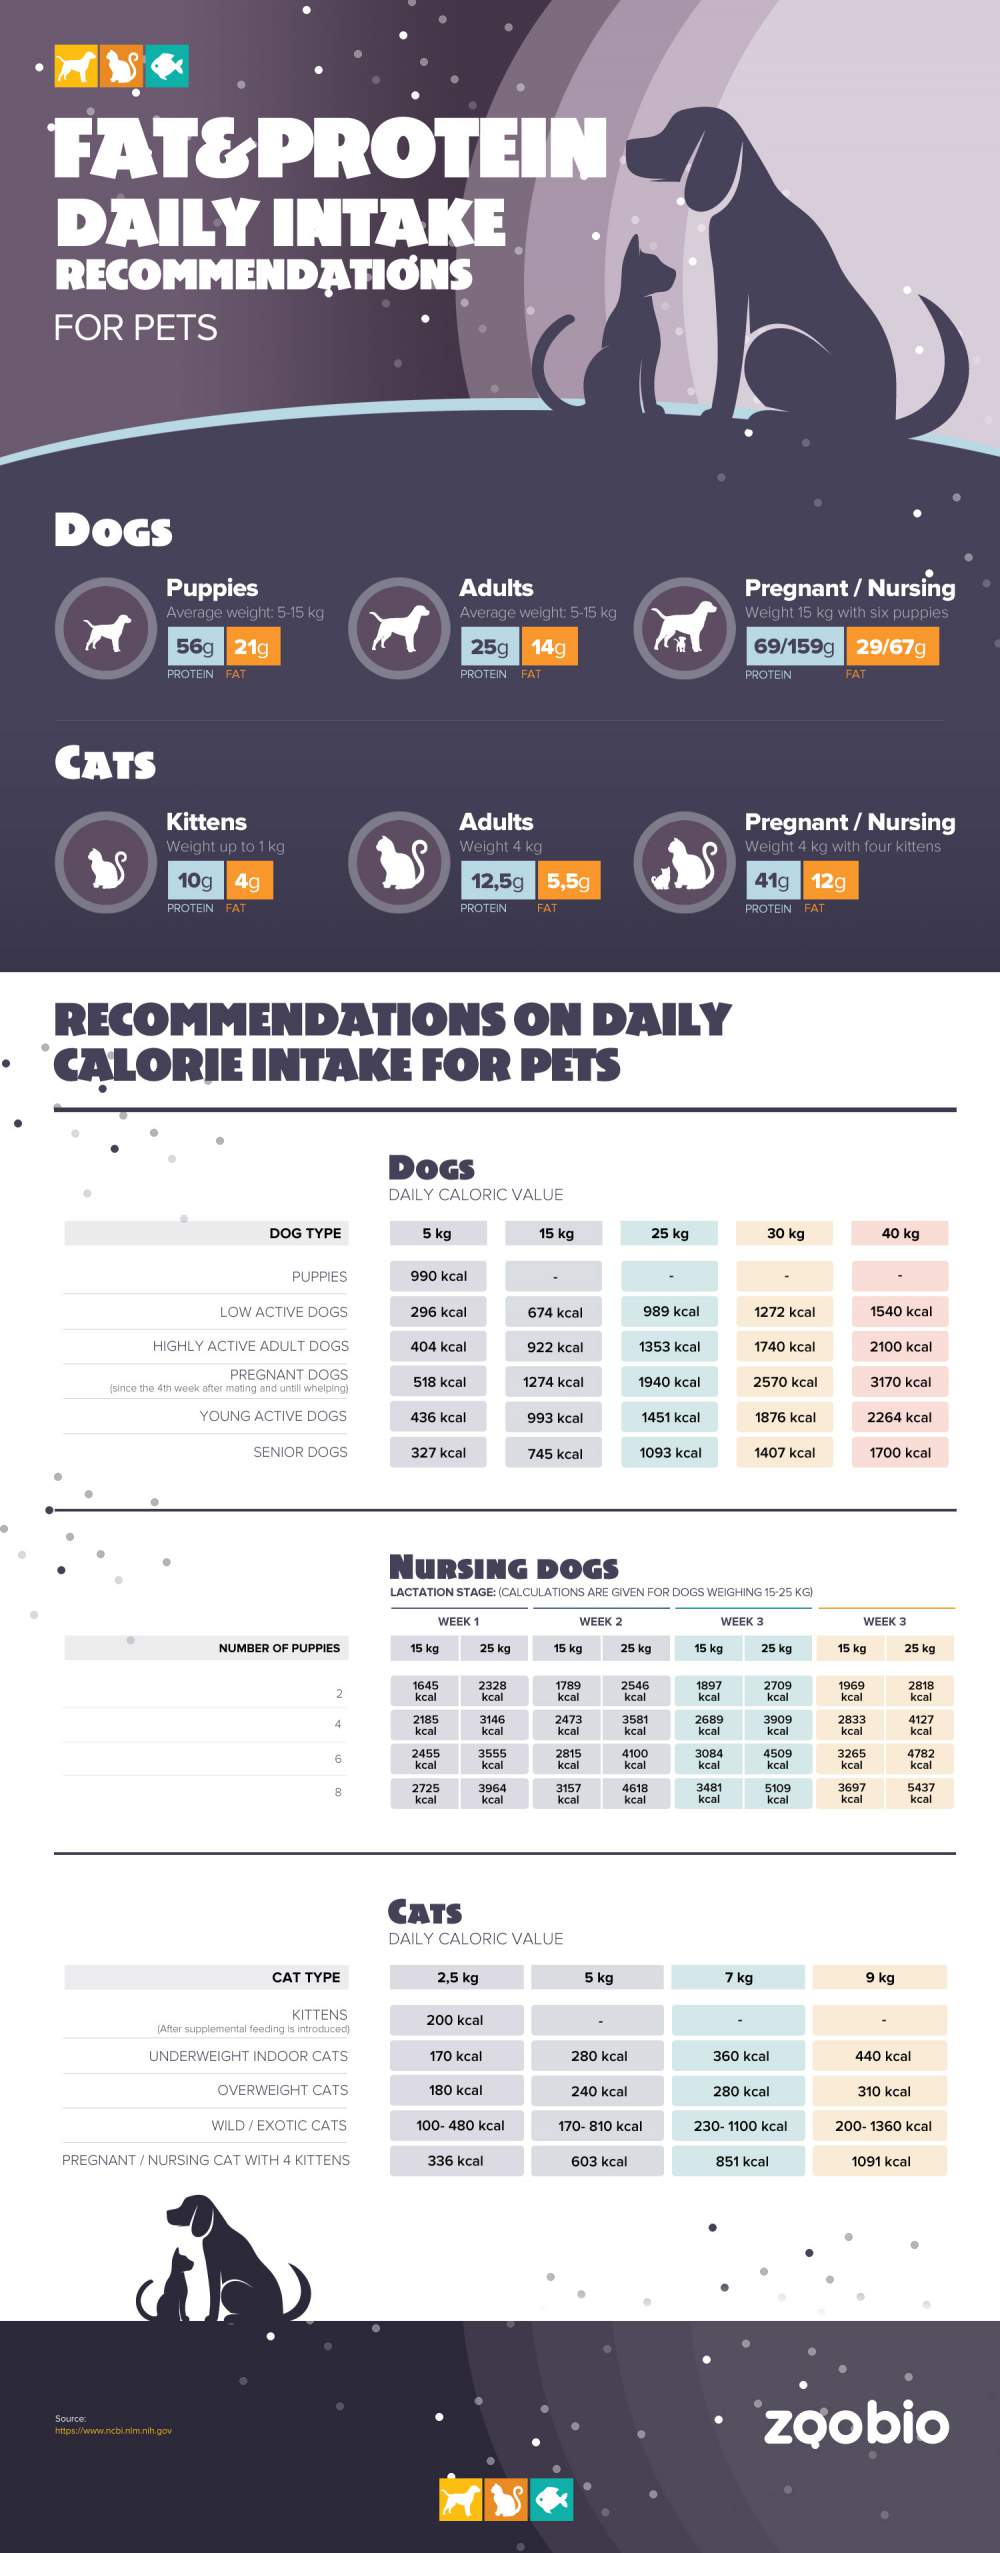 fat-protein-daily-recommendations-for-pets